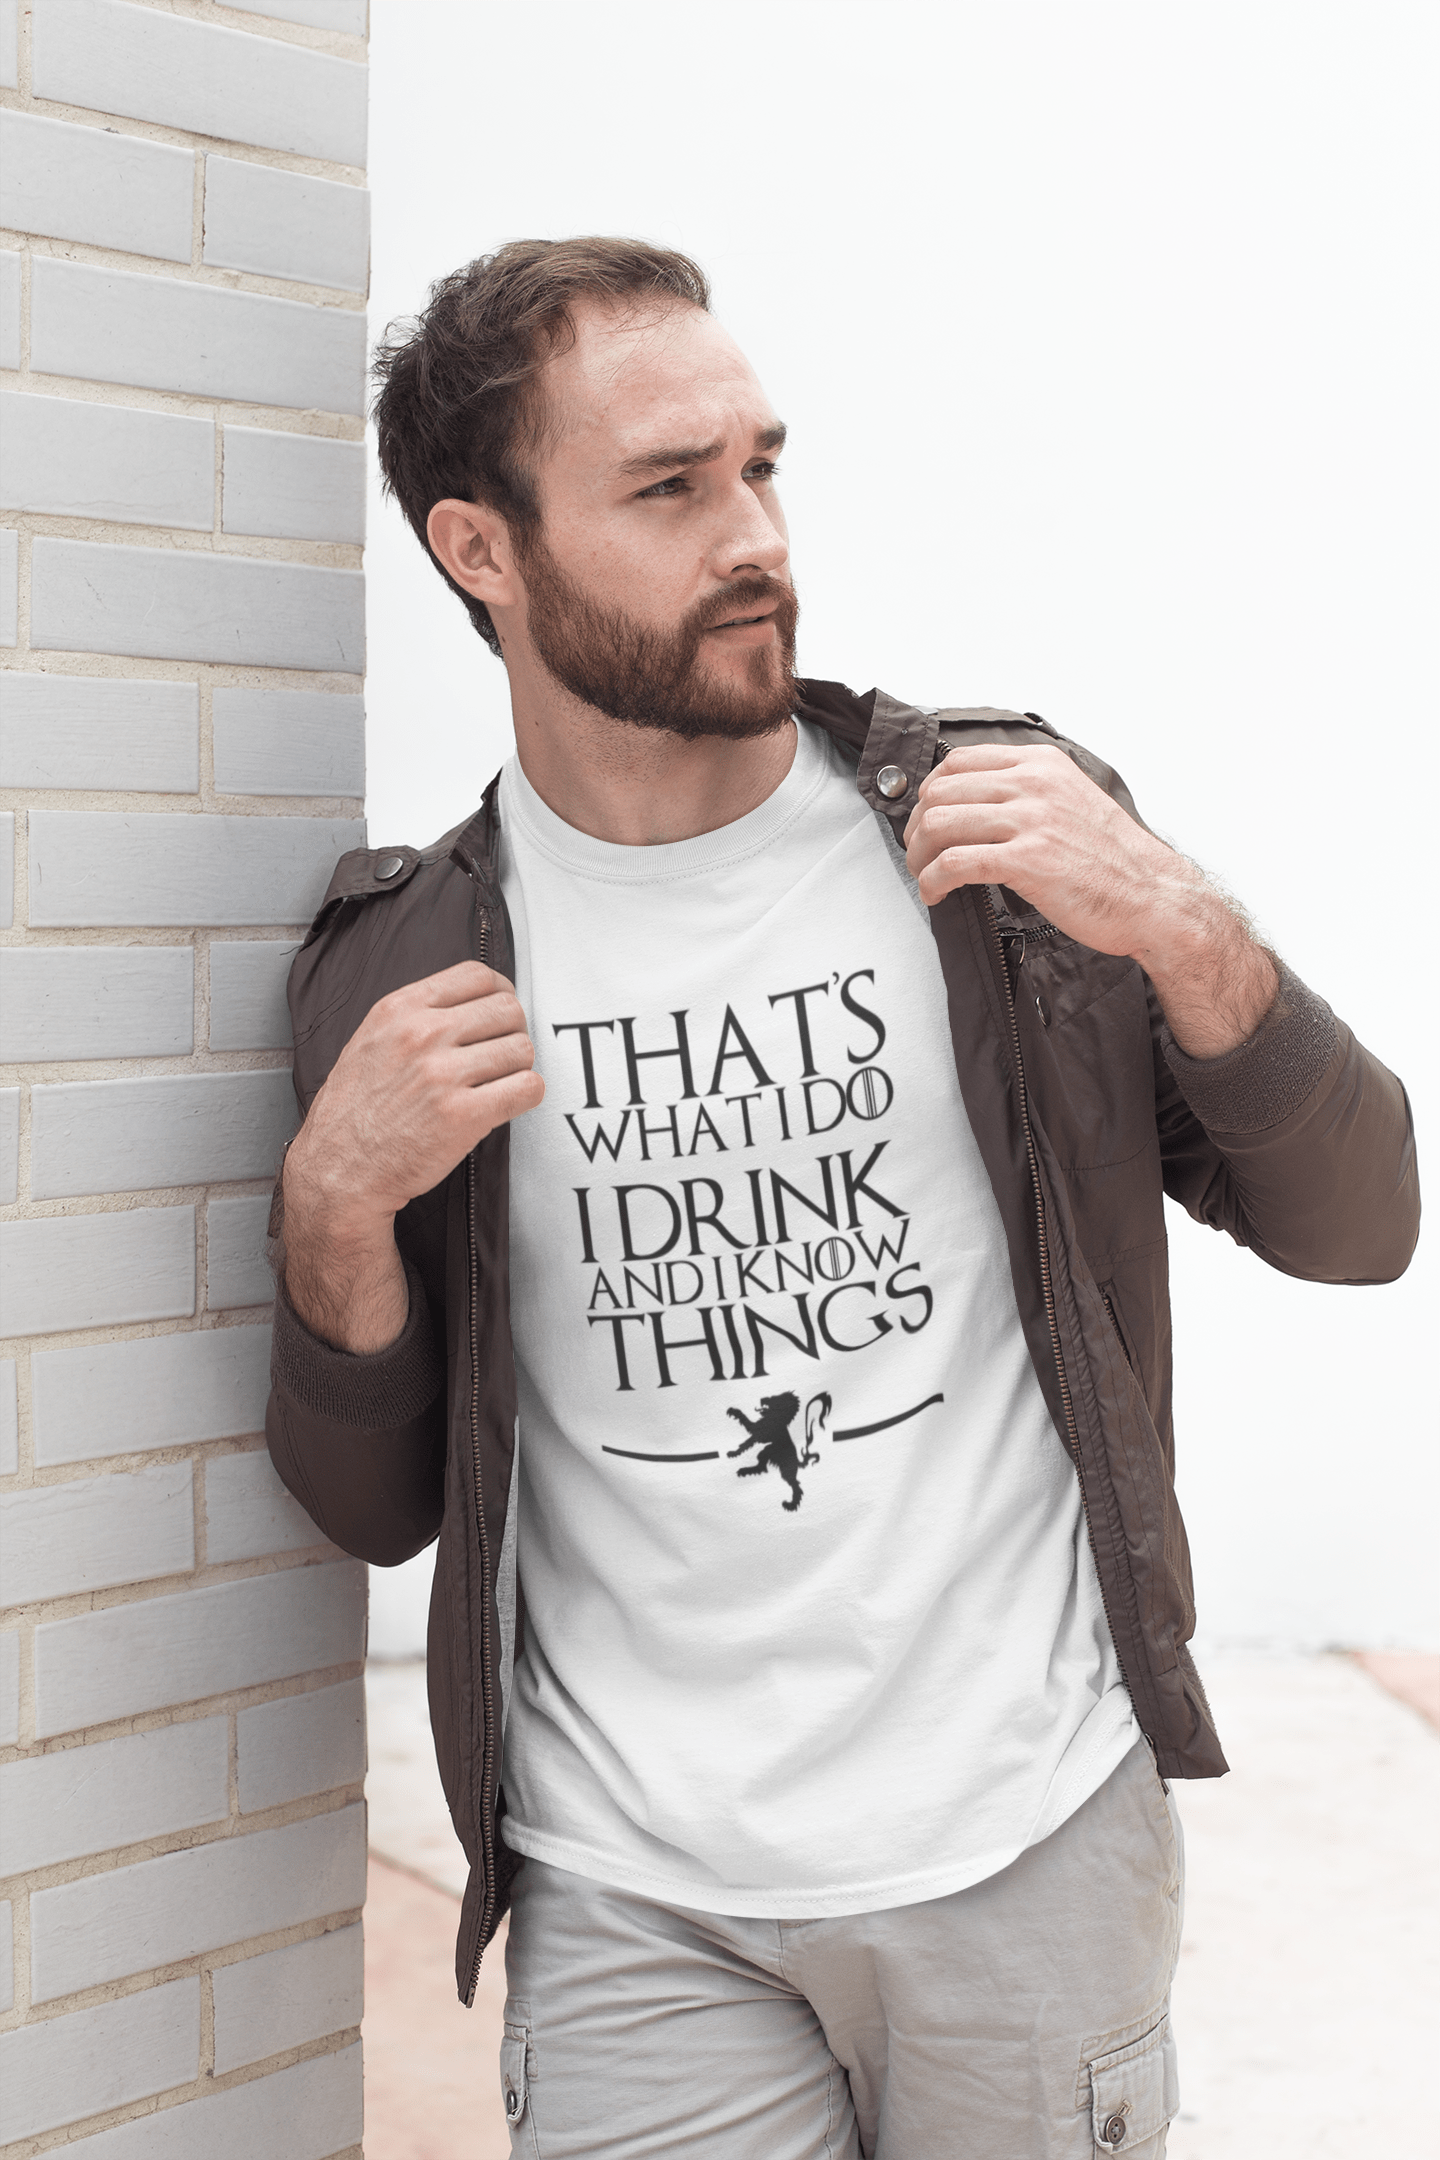 That's What I Do I Drink and I know Things - GOT T-shirt - Men's White tee, 100% Cotton 00260